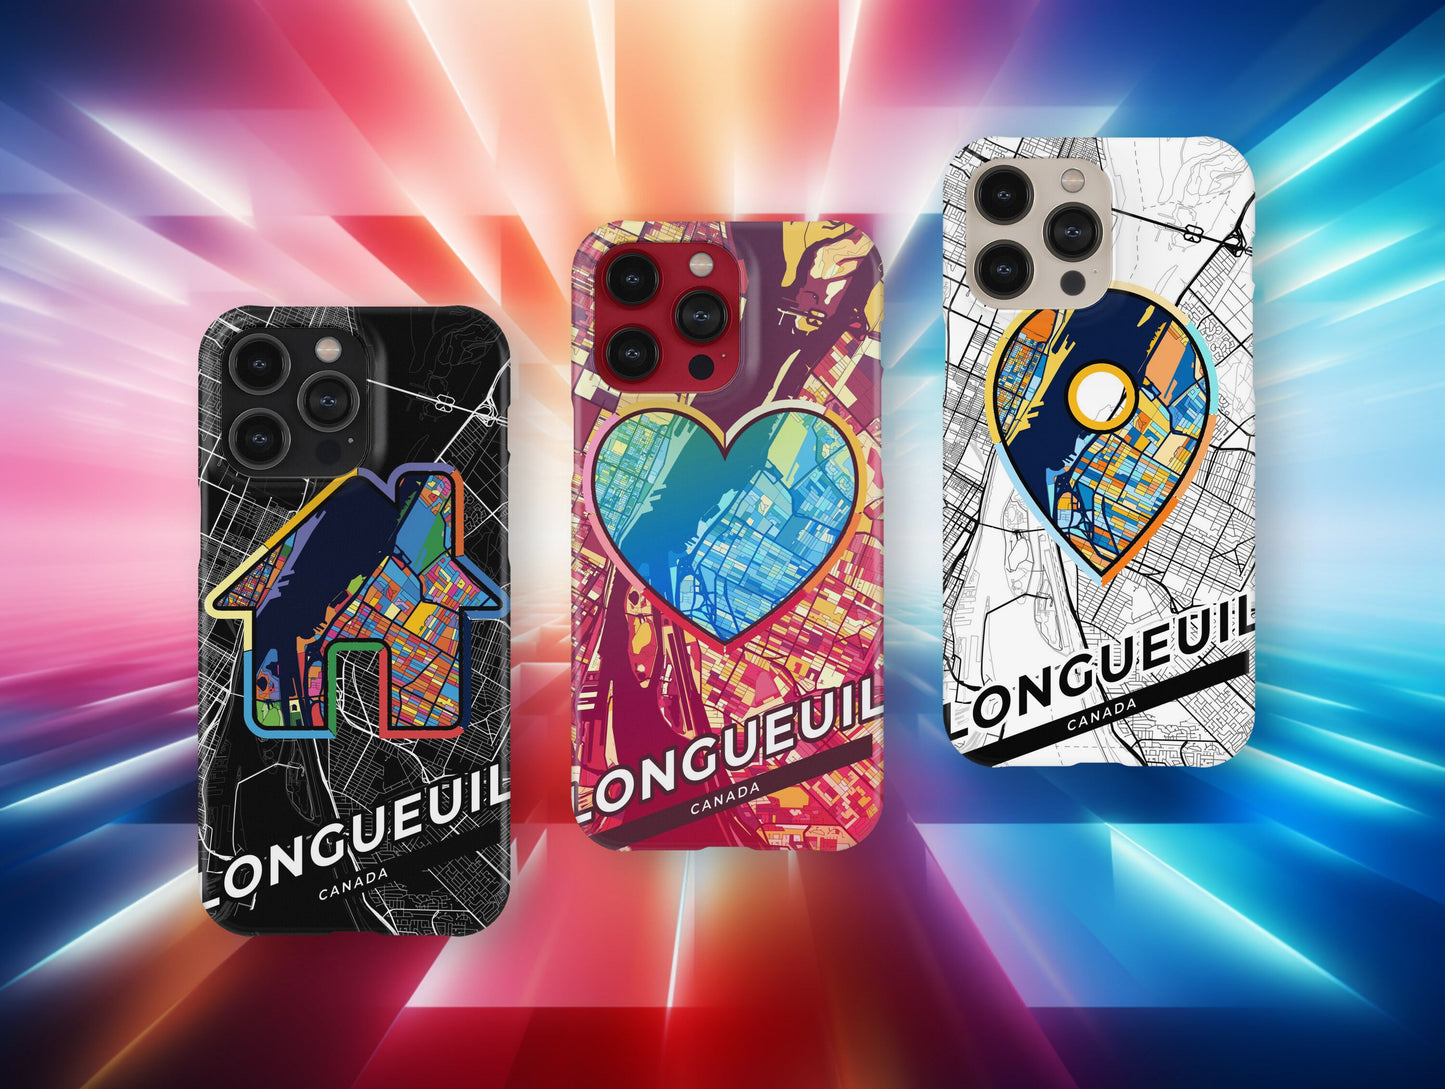 Longueuil Canada slim phone case with colorful icon. Birthday, wedding or housewarming gift. Couple match cases.